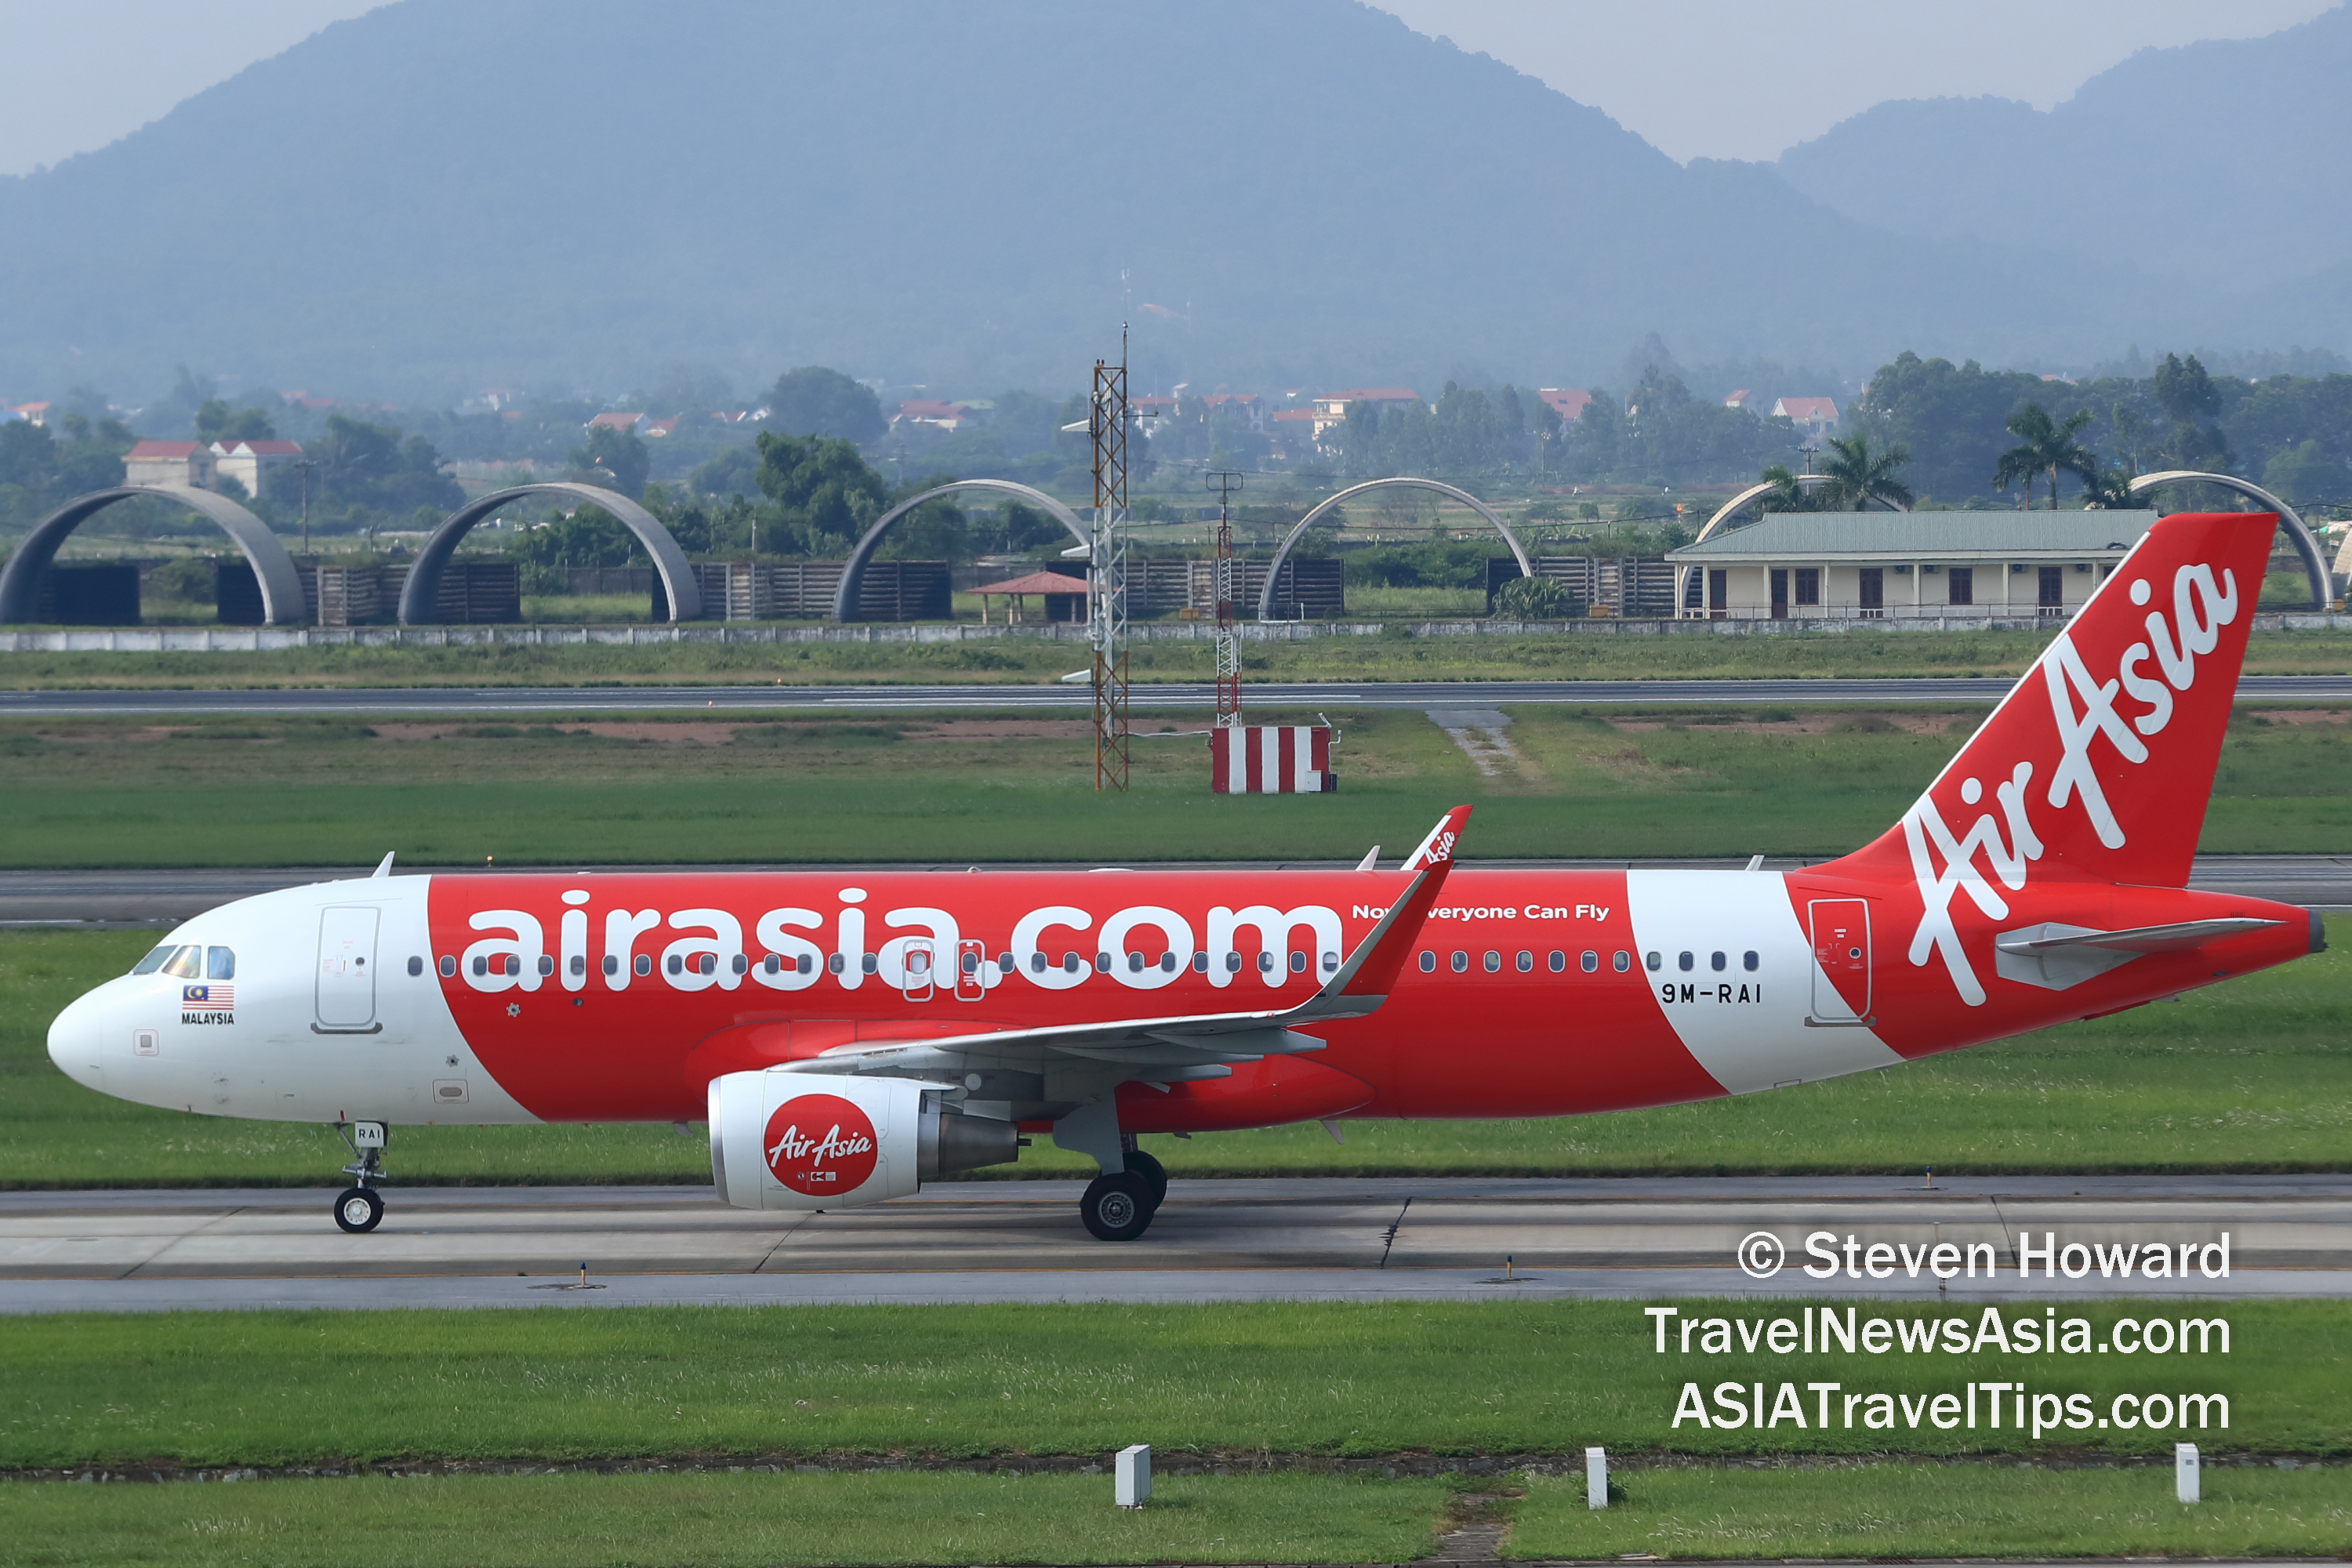 AirAsia Malaysia Airbus A320 reg: 9M-RAI. Picture by Steven Howard of TravelNewsAsia.com Click to enlarge.